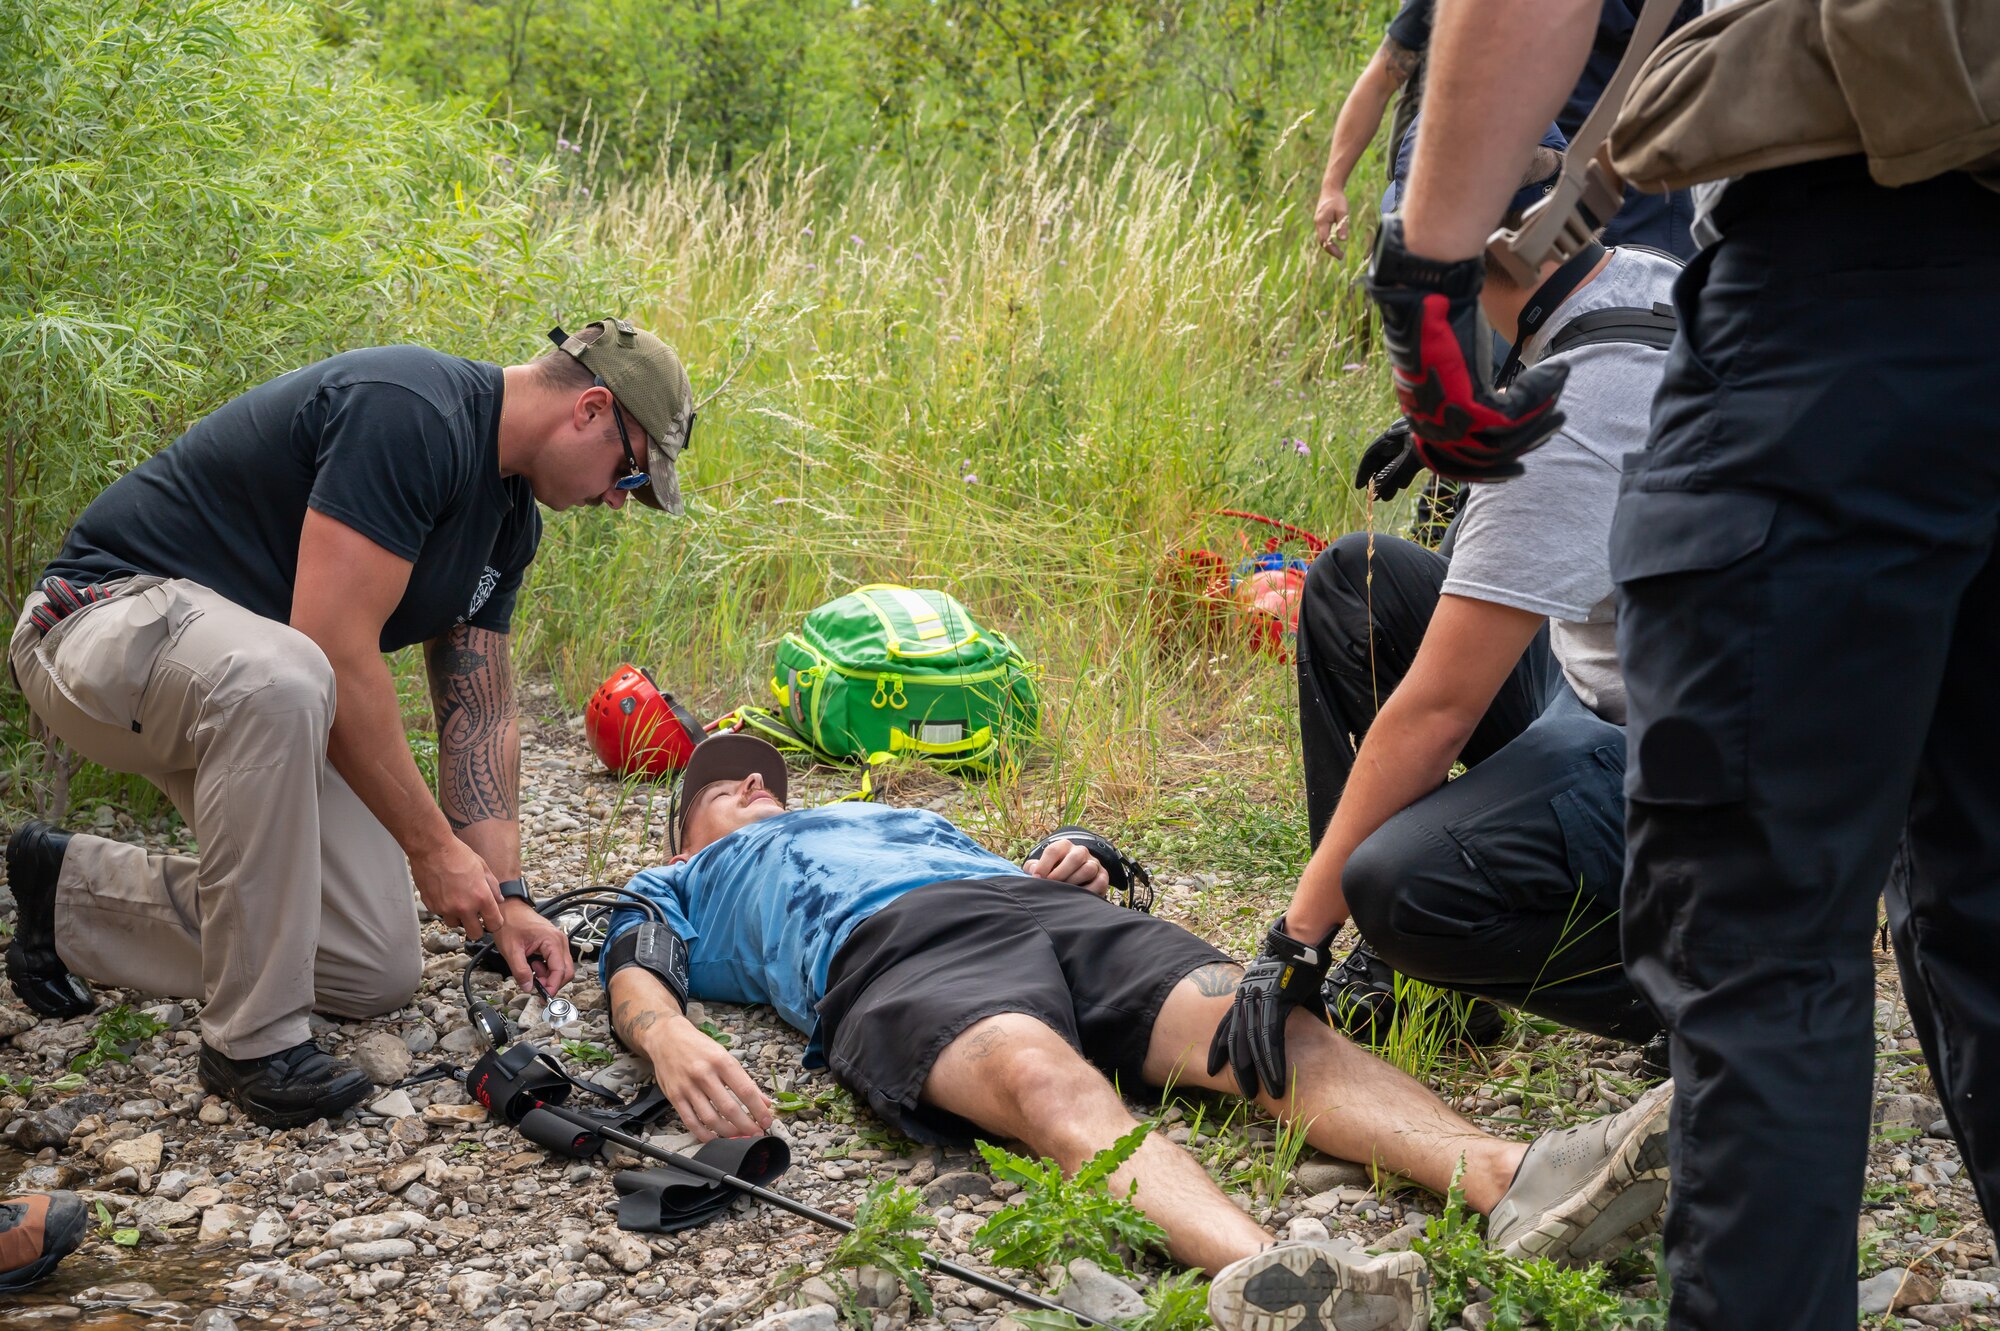 Members of the 341st Civil Engineer Squadron Fire Department respond to a simulated patient during a search and rescue exercise Aug. 2, 2022, in Sluice Boxes State Park, Mont.